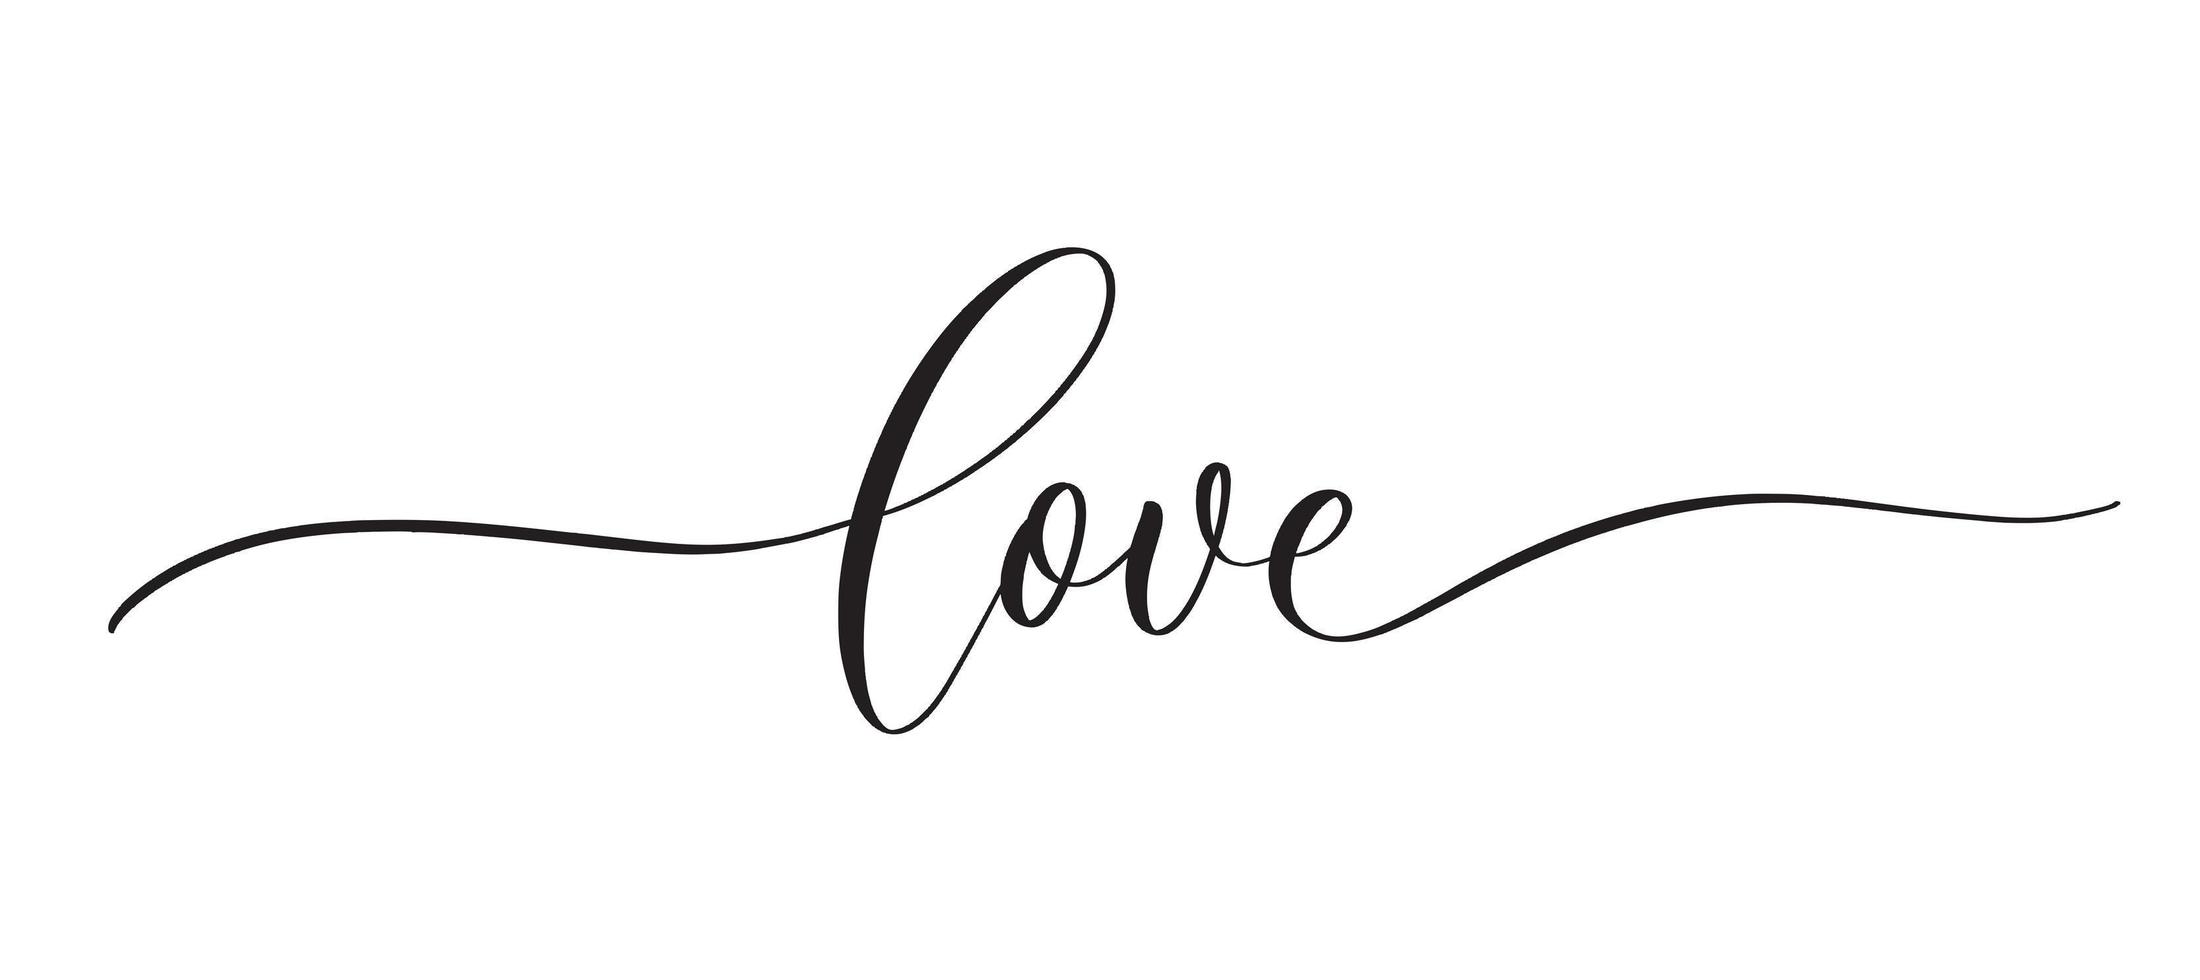 Love - typography lettering quote, brush calligraphy banner with thin line. vector